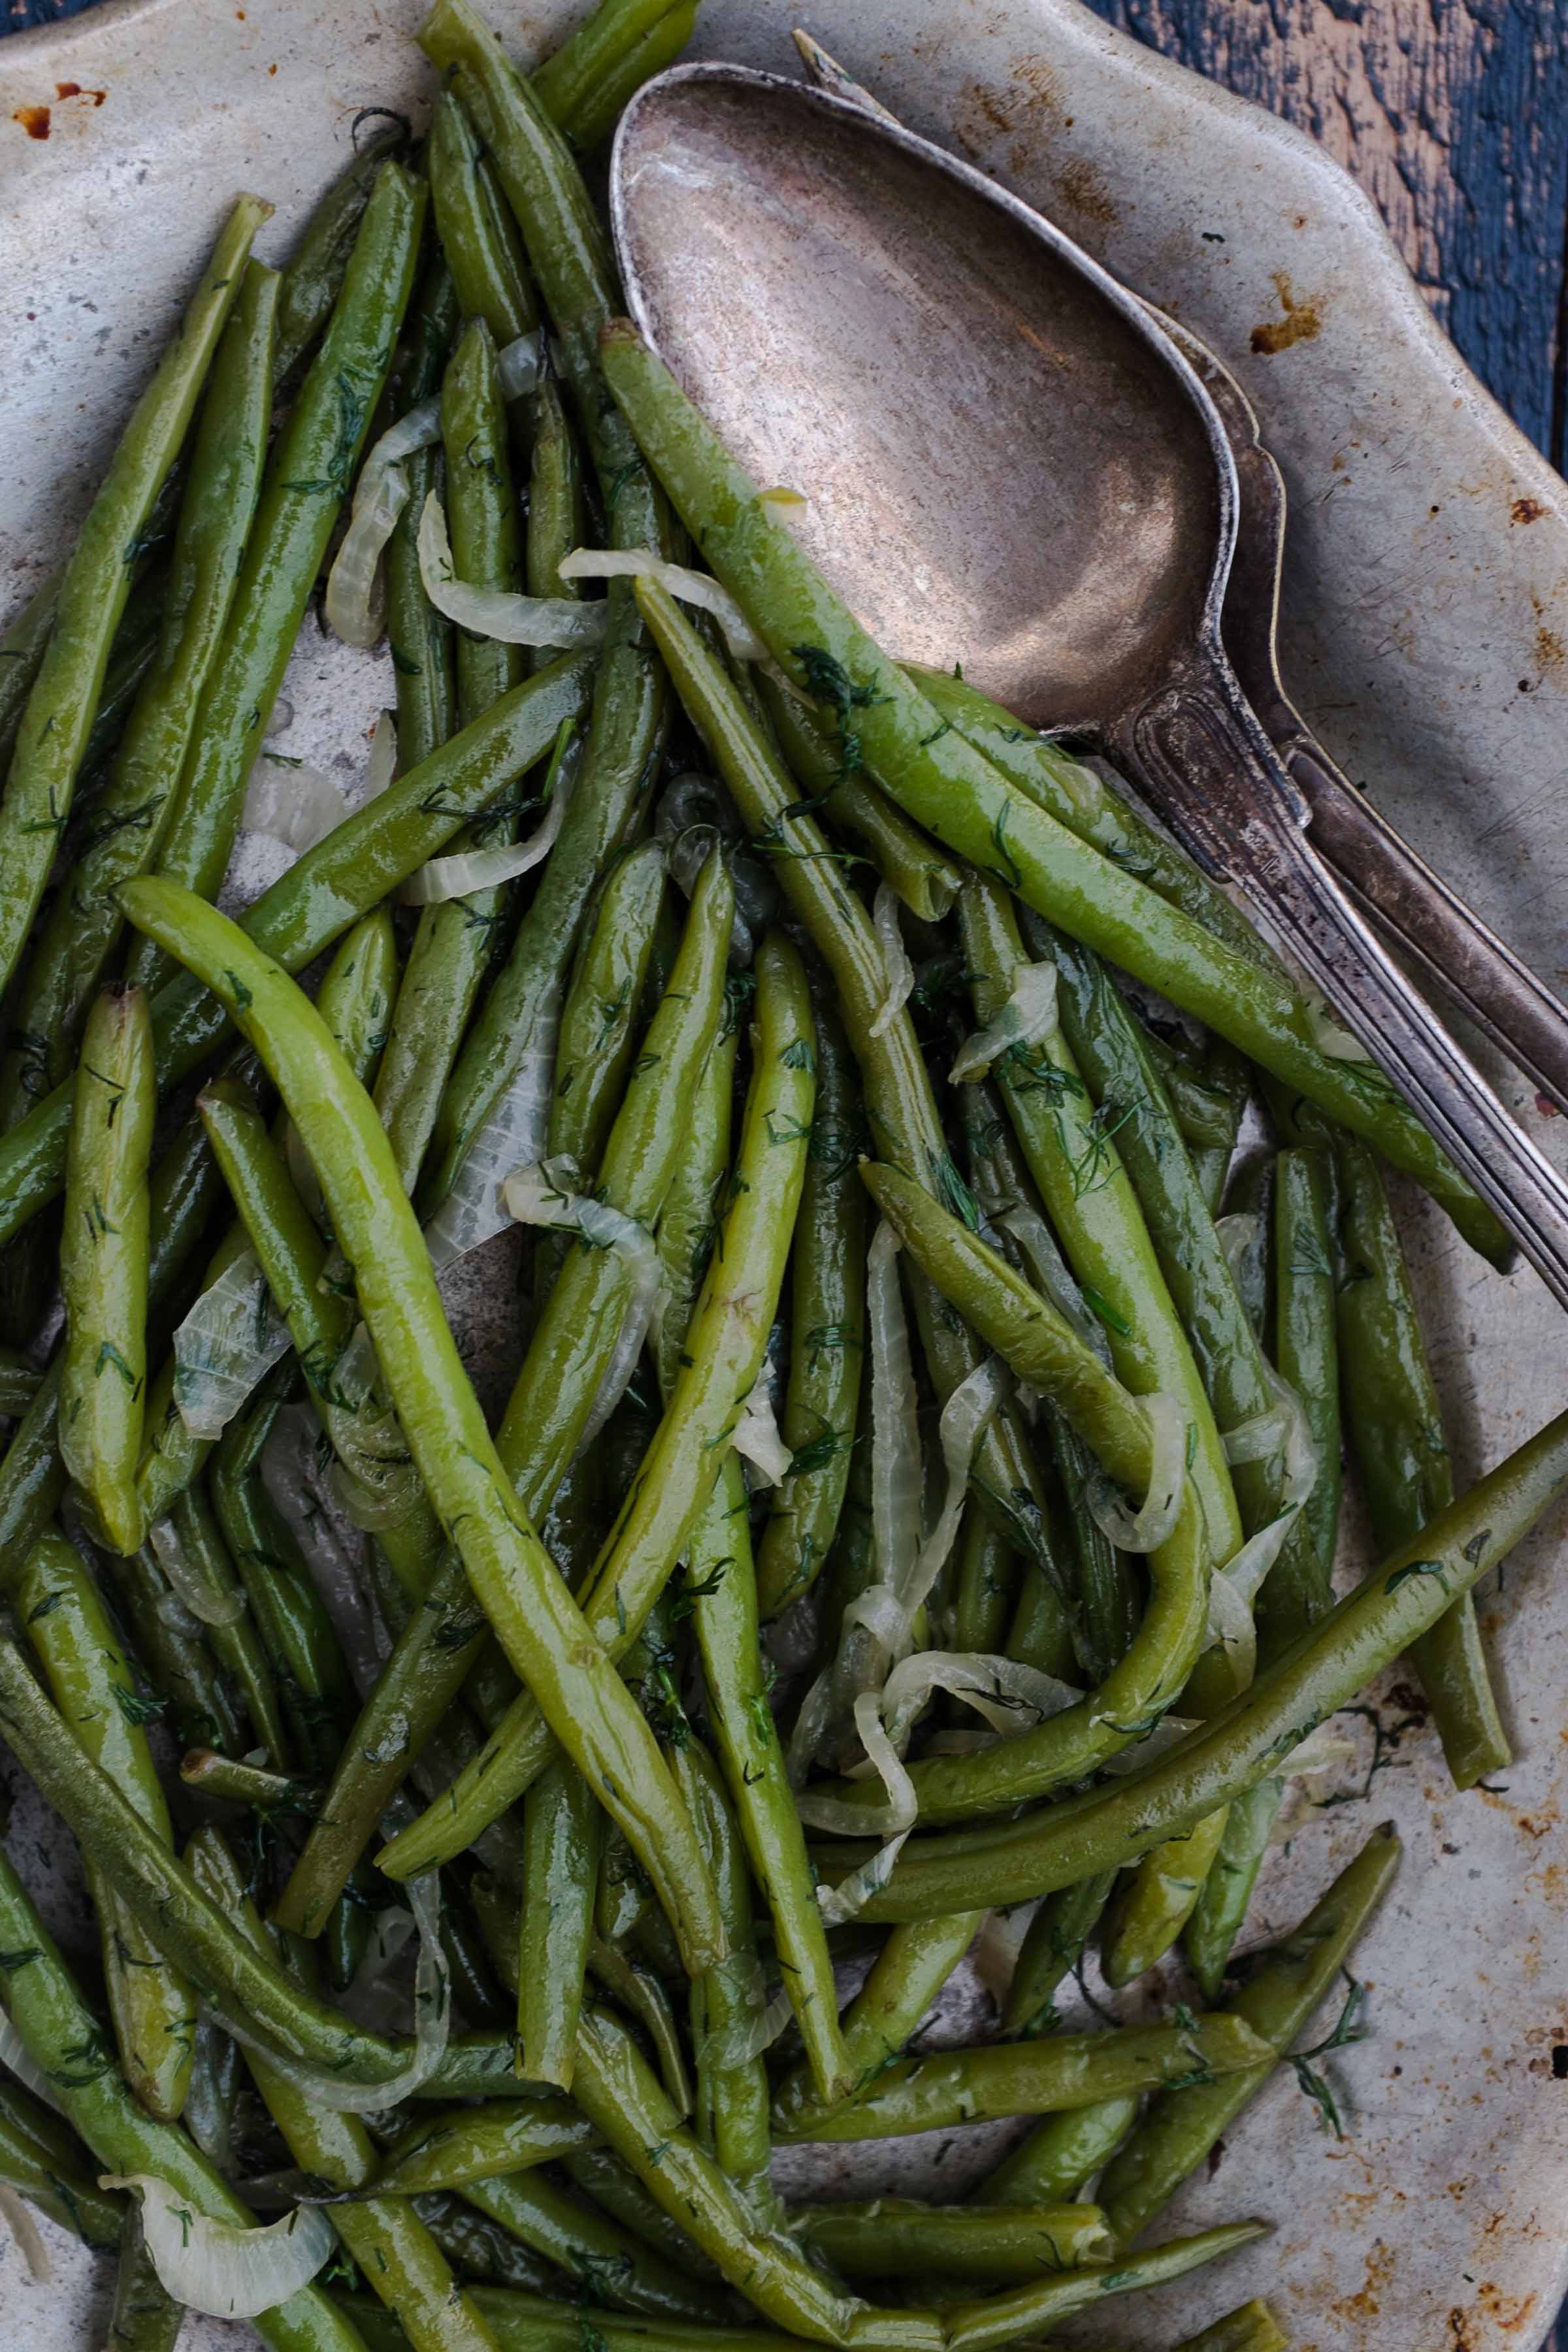 Braised-Green-Beans-with-Dill | GFF Magazine